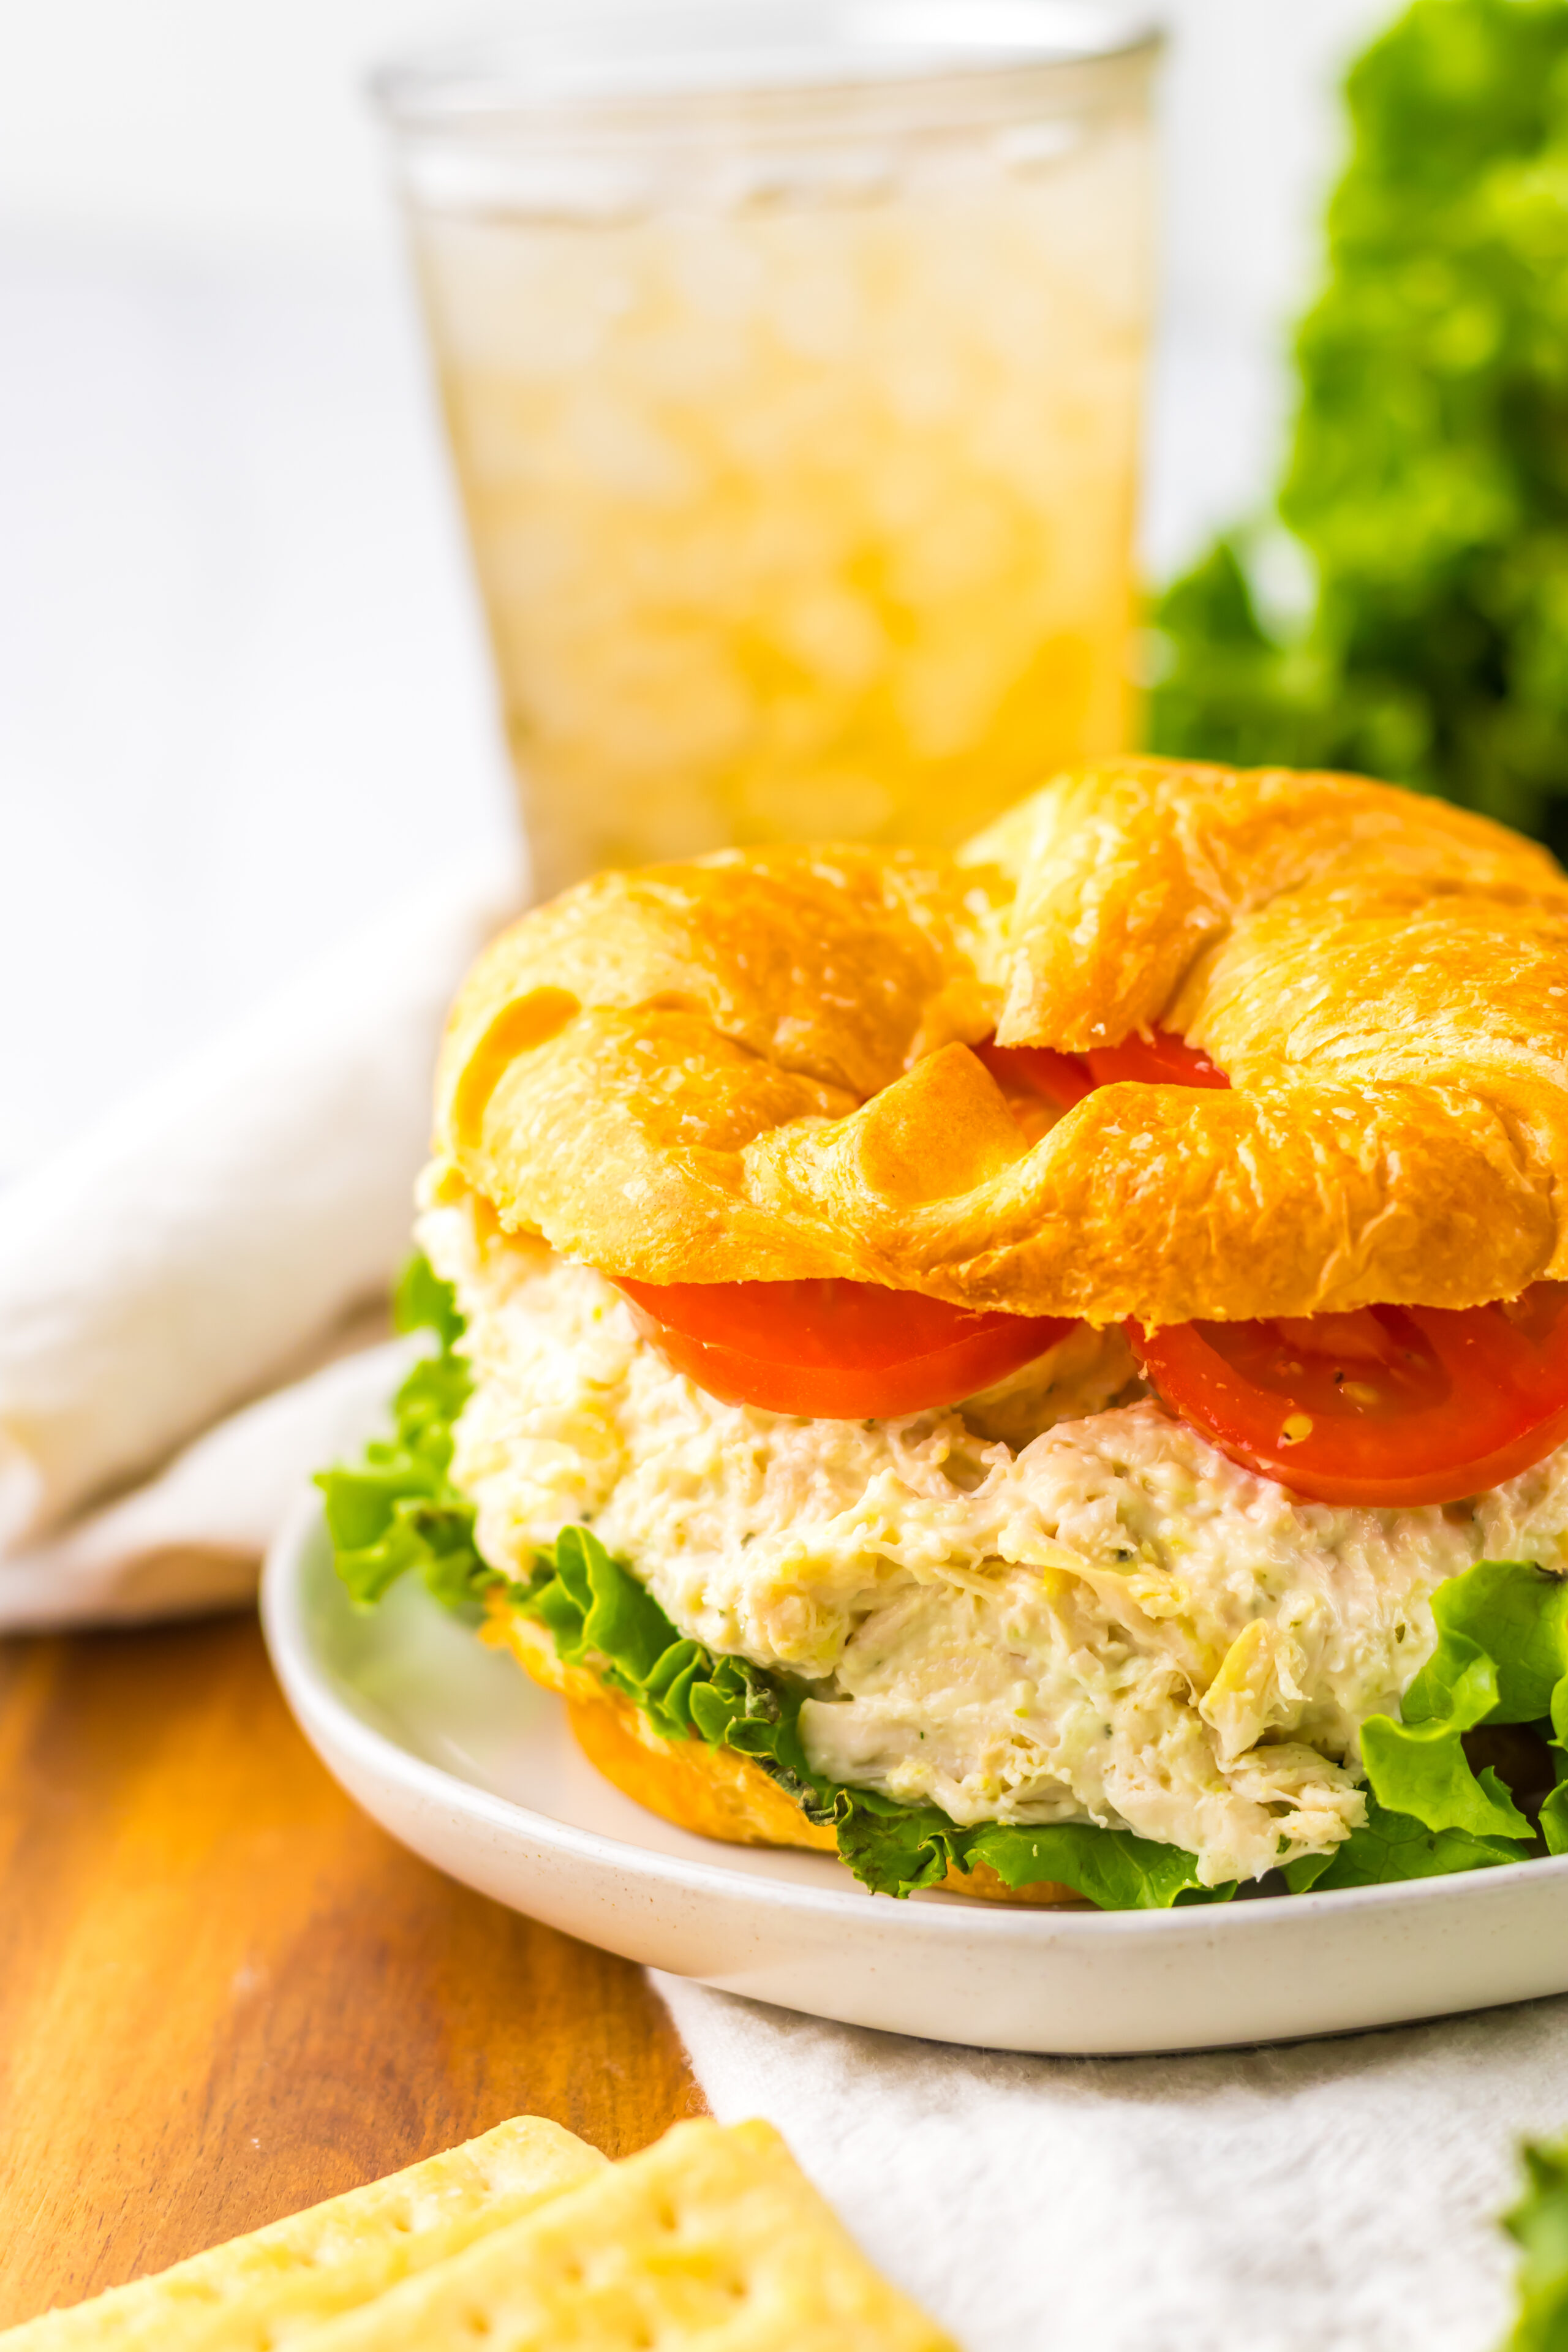 chicken salad served on a croissant with lettuce and tomato.